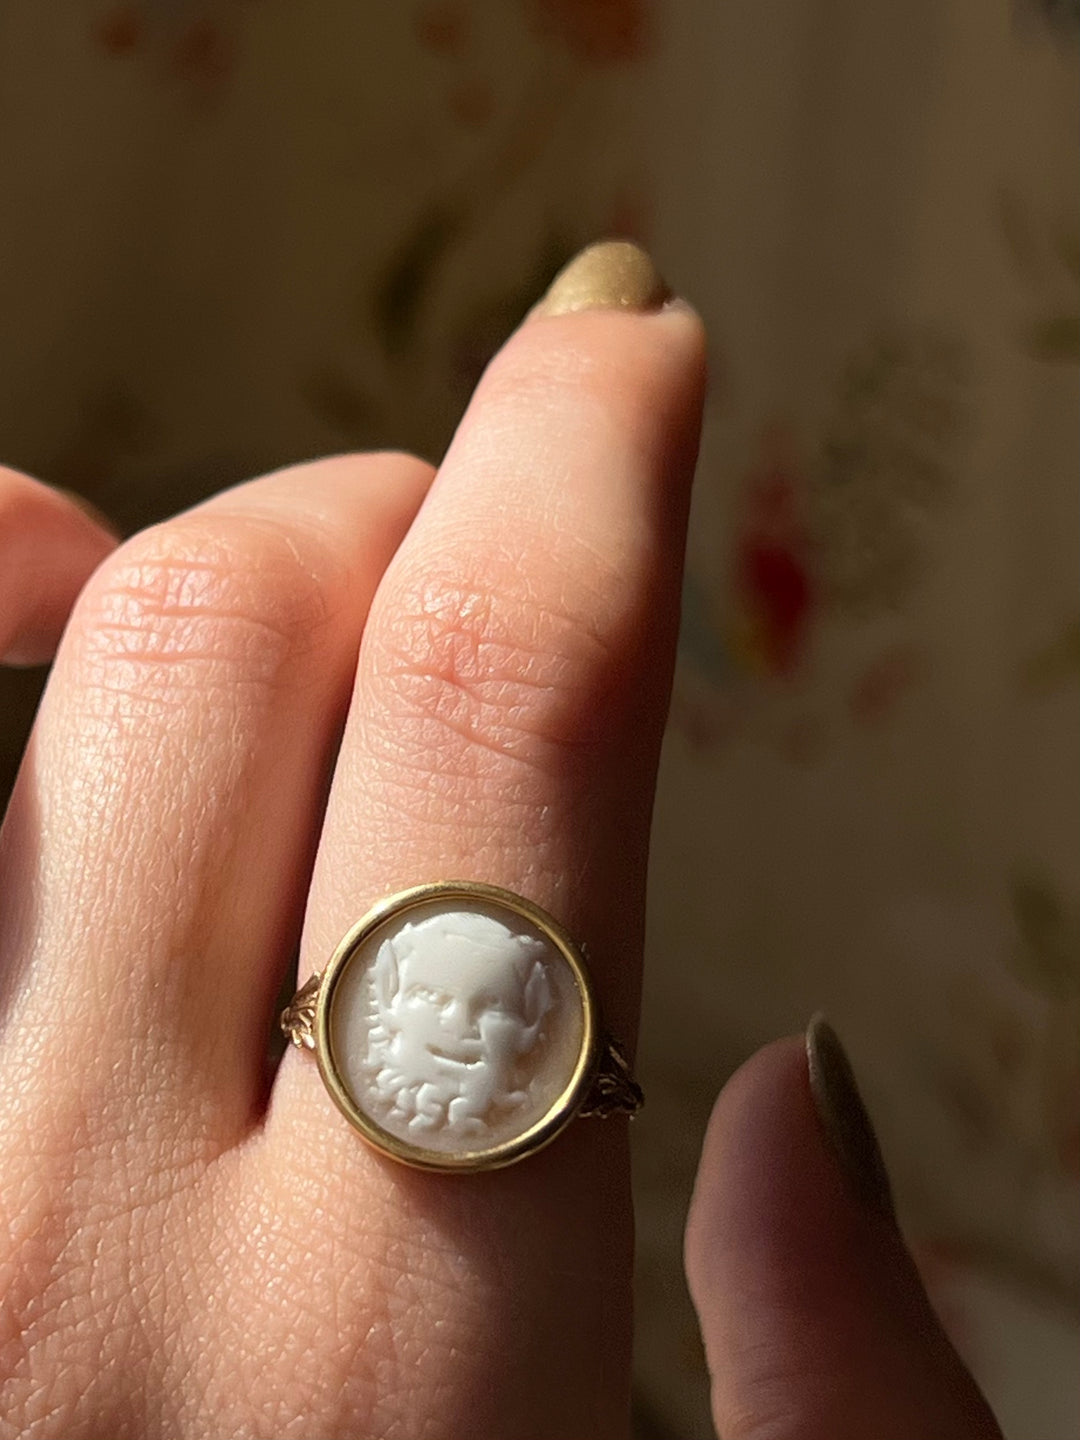 Superb 18ct Pan or Satyr Cameo Ring c 1830 French